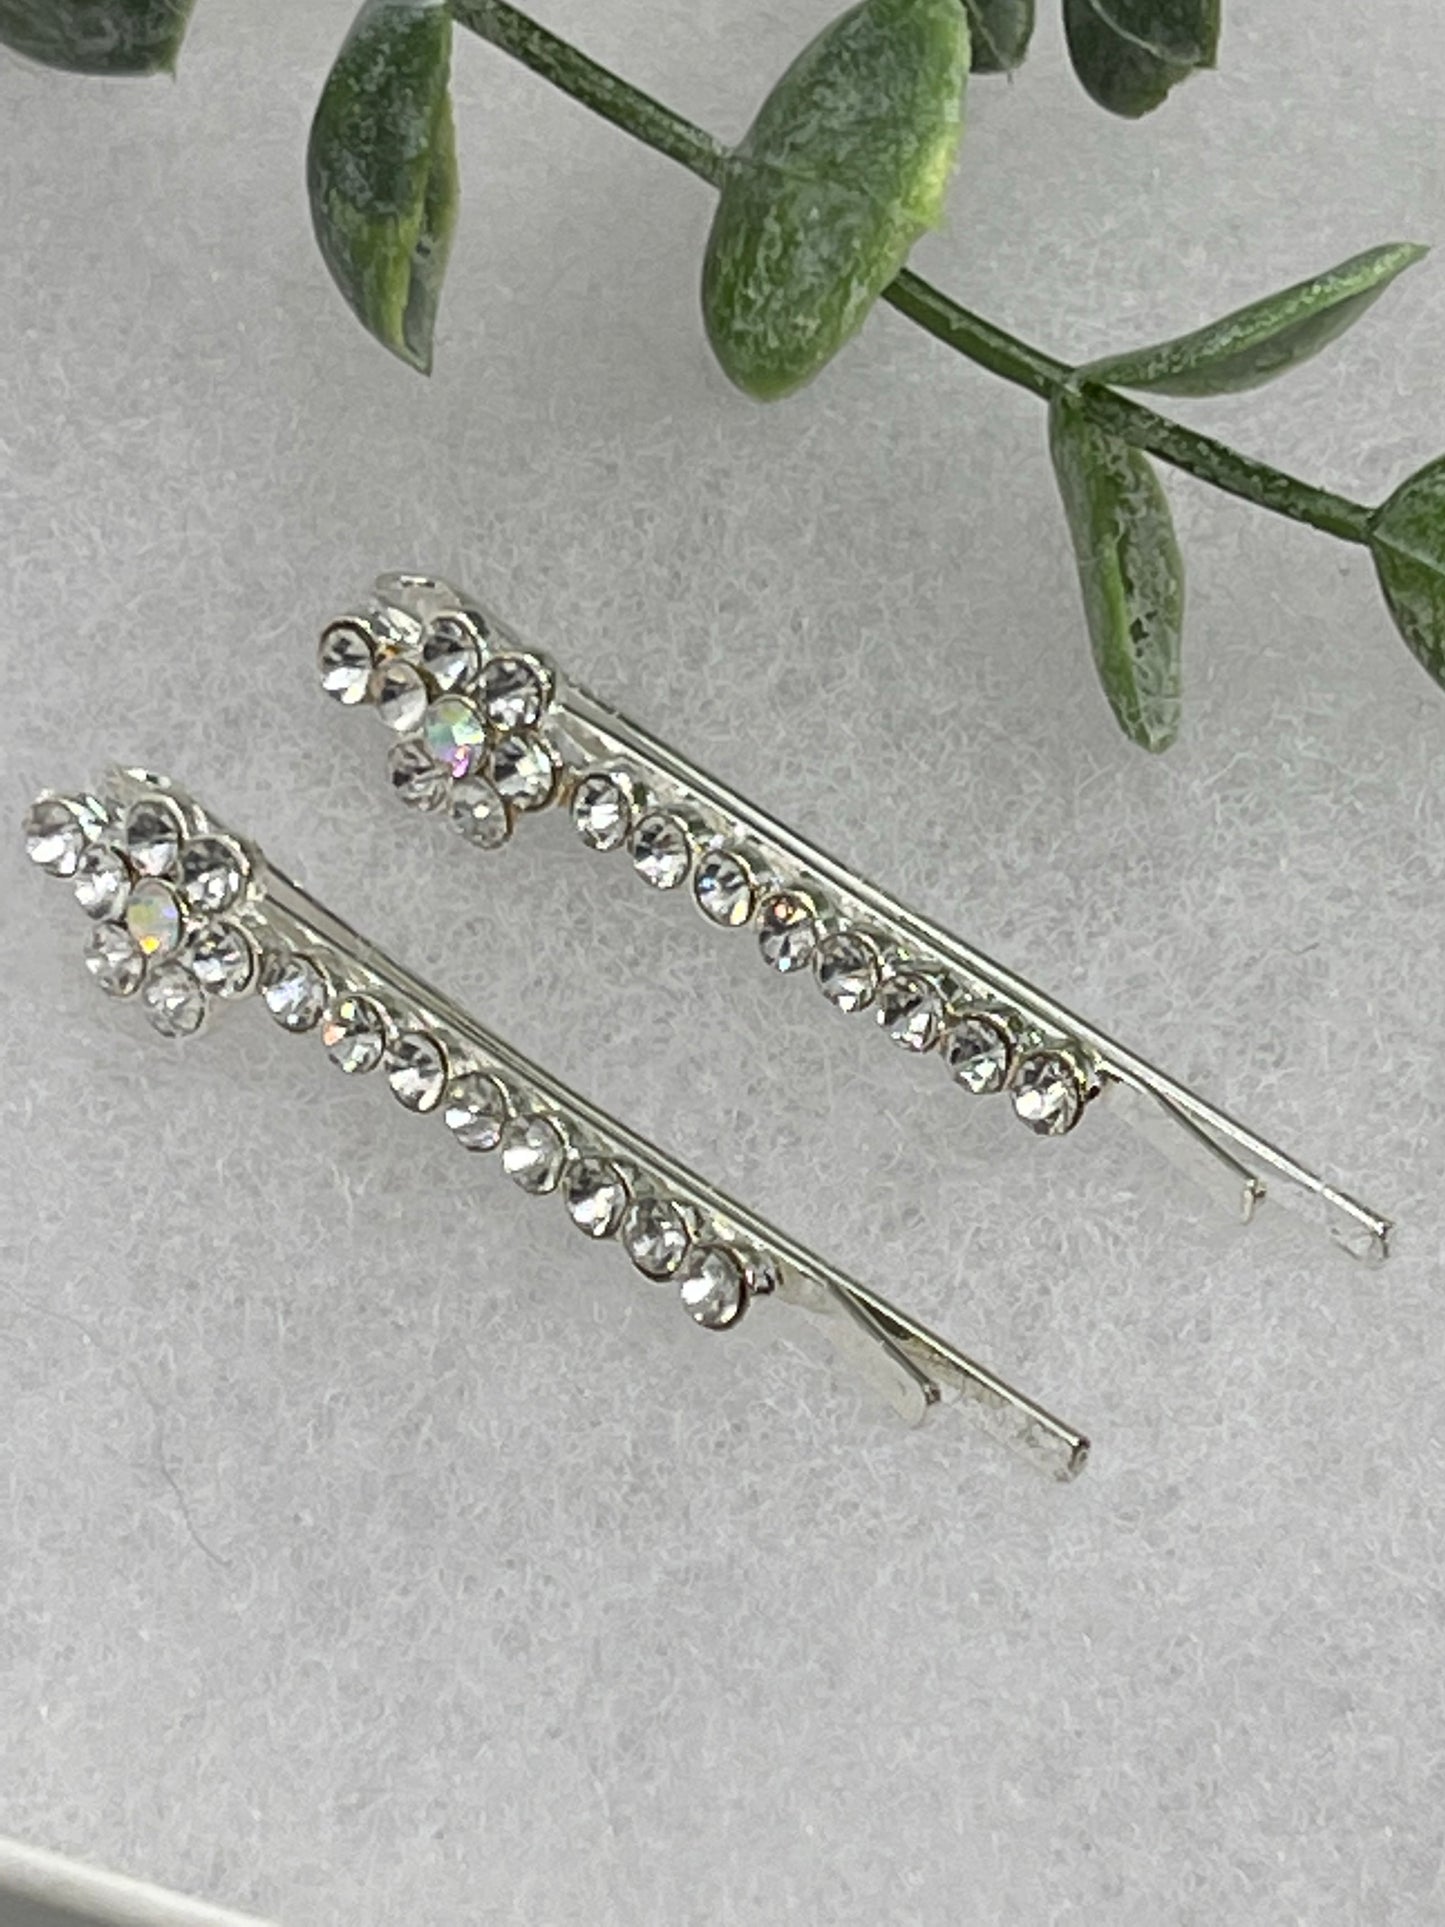 Clear crystal rhinestone approximately 2.0” silver tone hair pins 2 pc set wedding bridal shower engagement formal princess accessory accessories